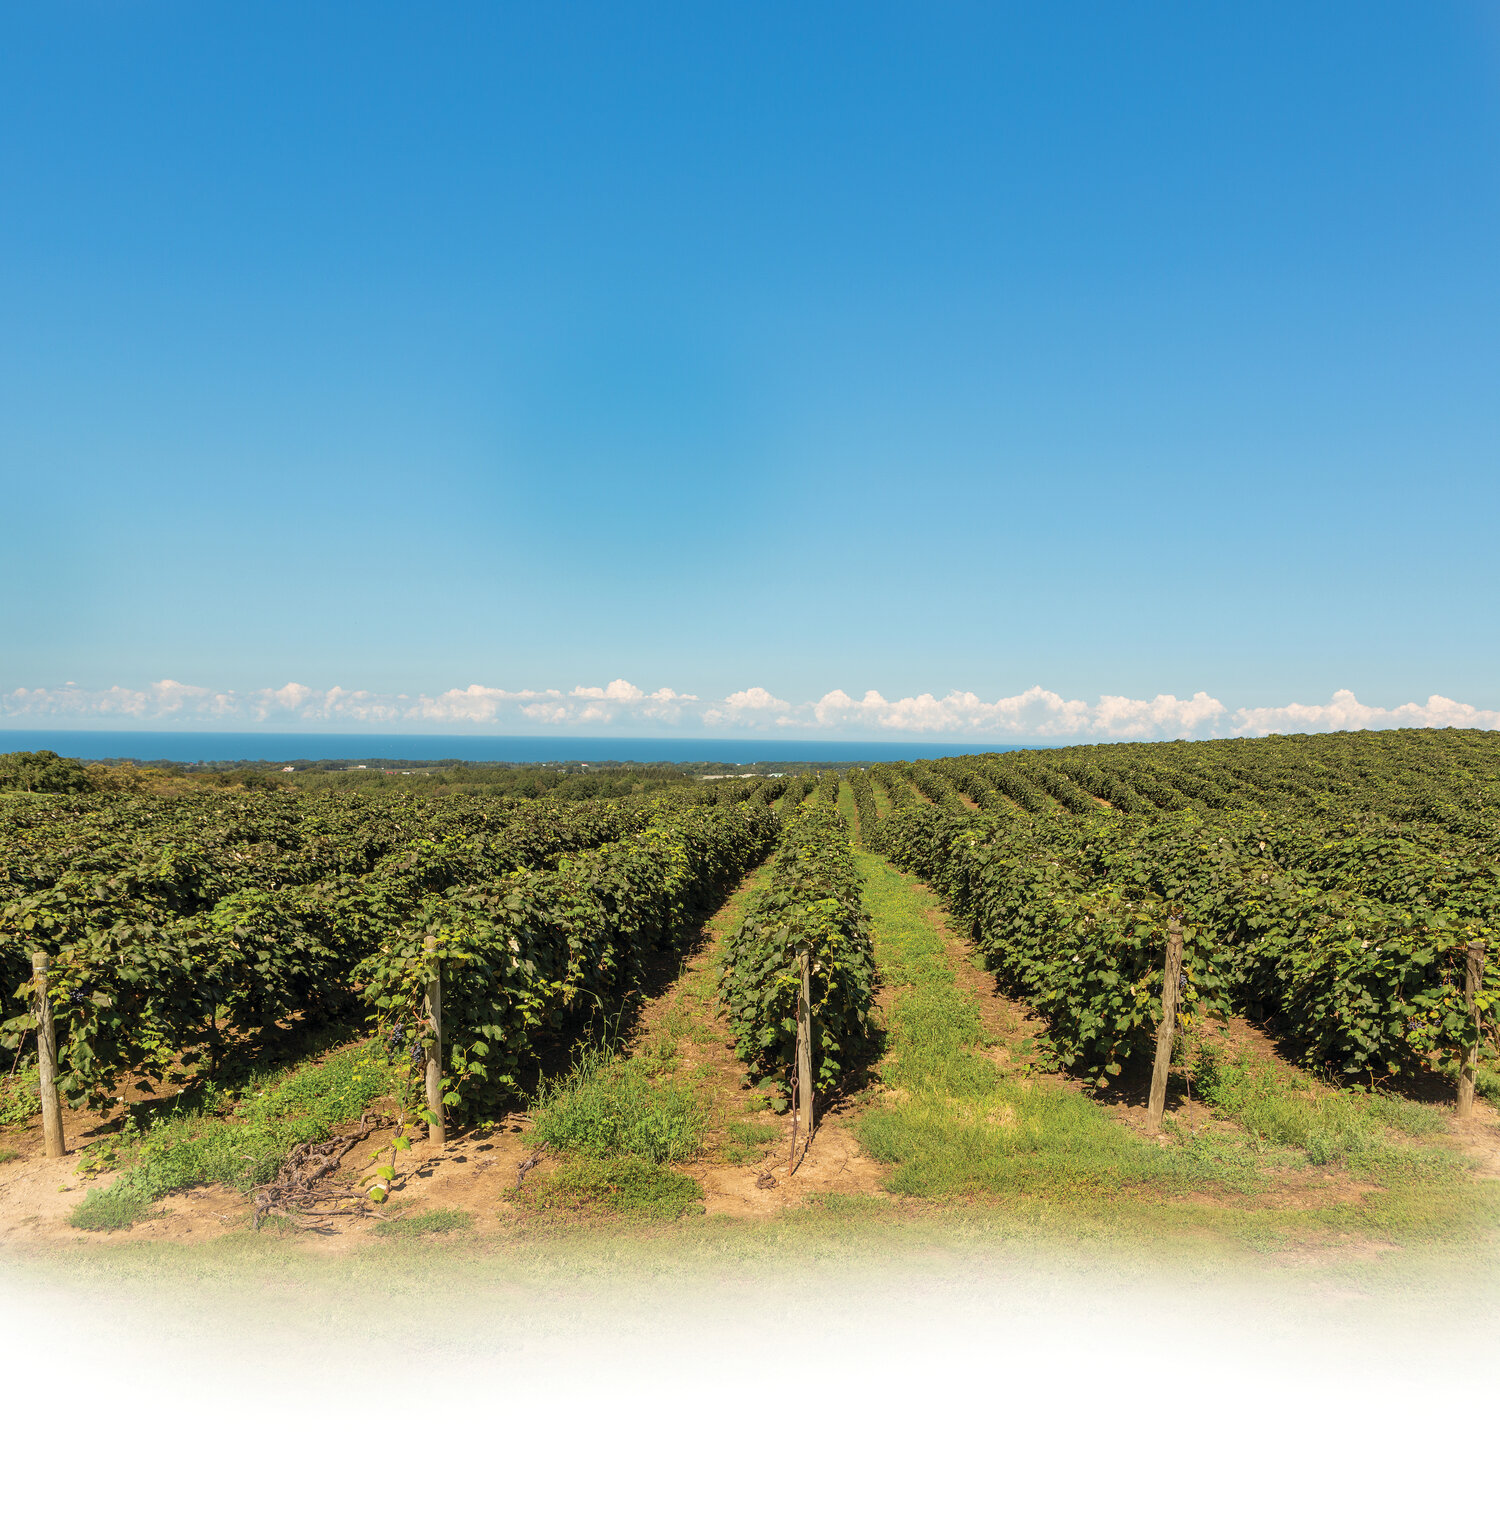 A peaceful scenery, blue skies overlooking the lush fields of Mazza Vineyards.